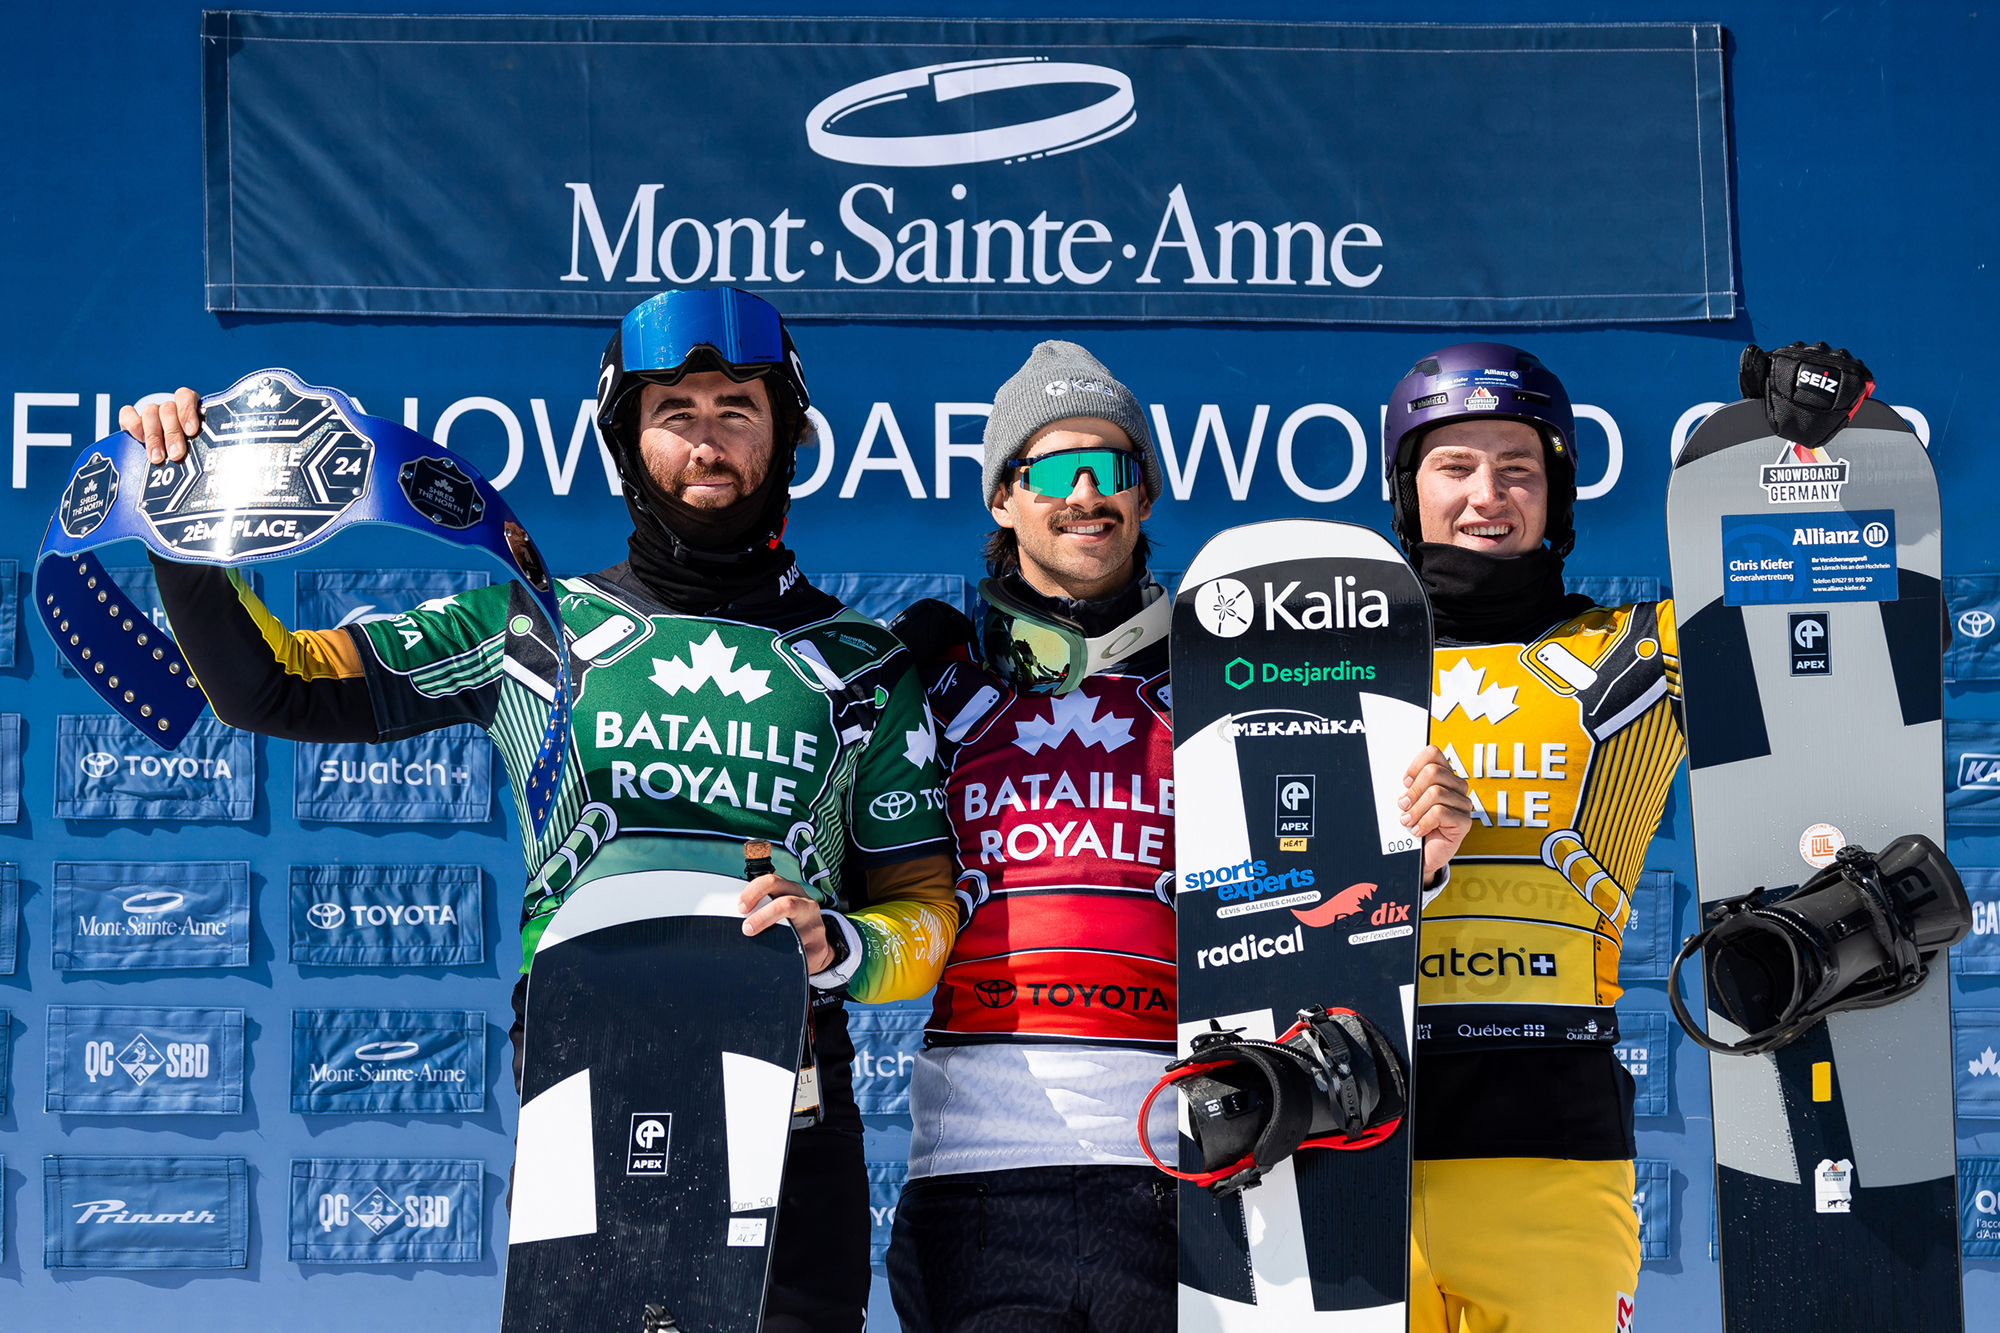 Cam Bolton wins the silver medal in the men's snowboard cross at the Mont Saint Anne WC2. IMAGE Miha Matavz